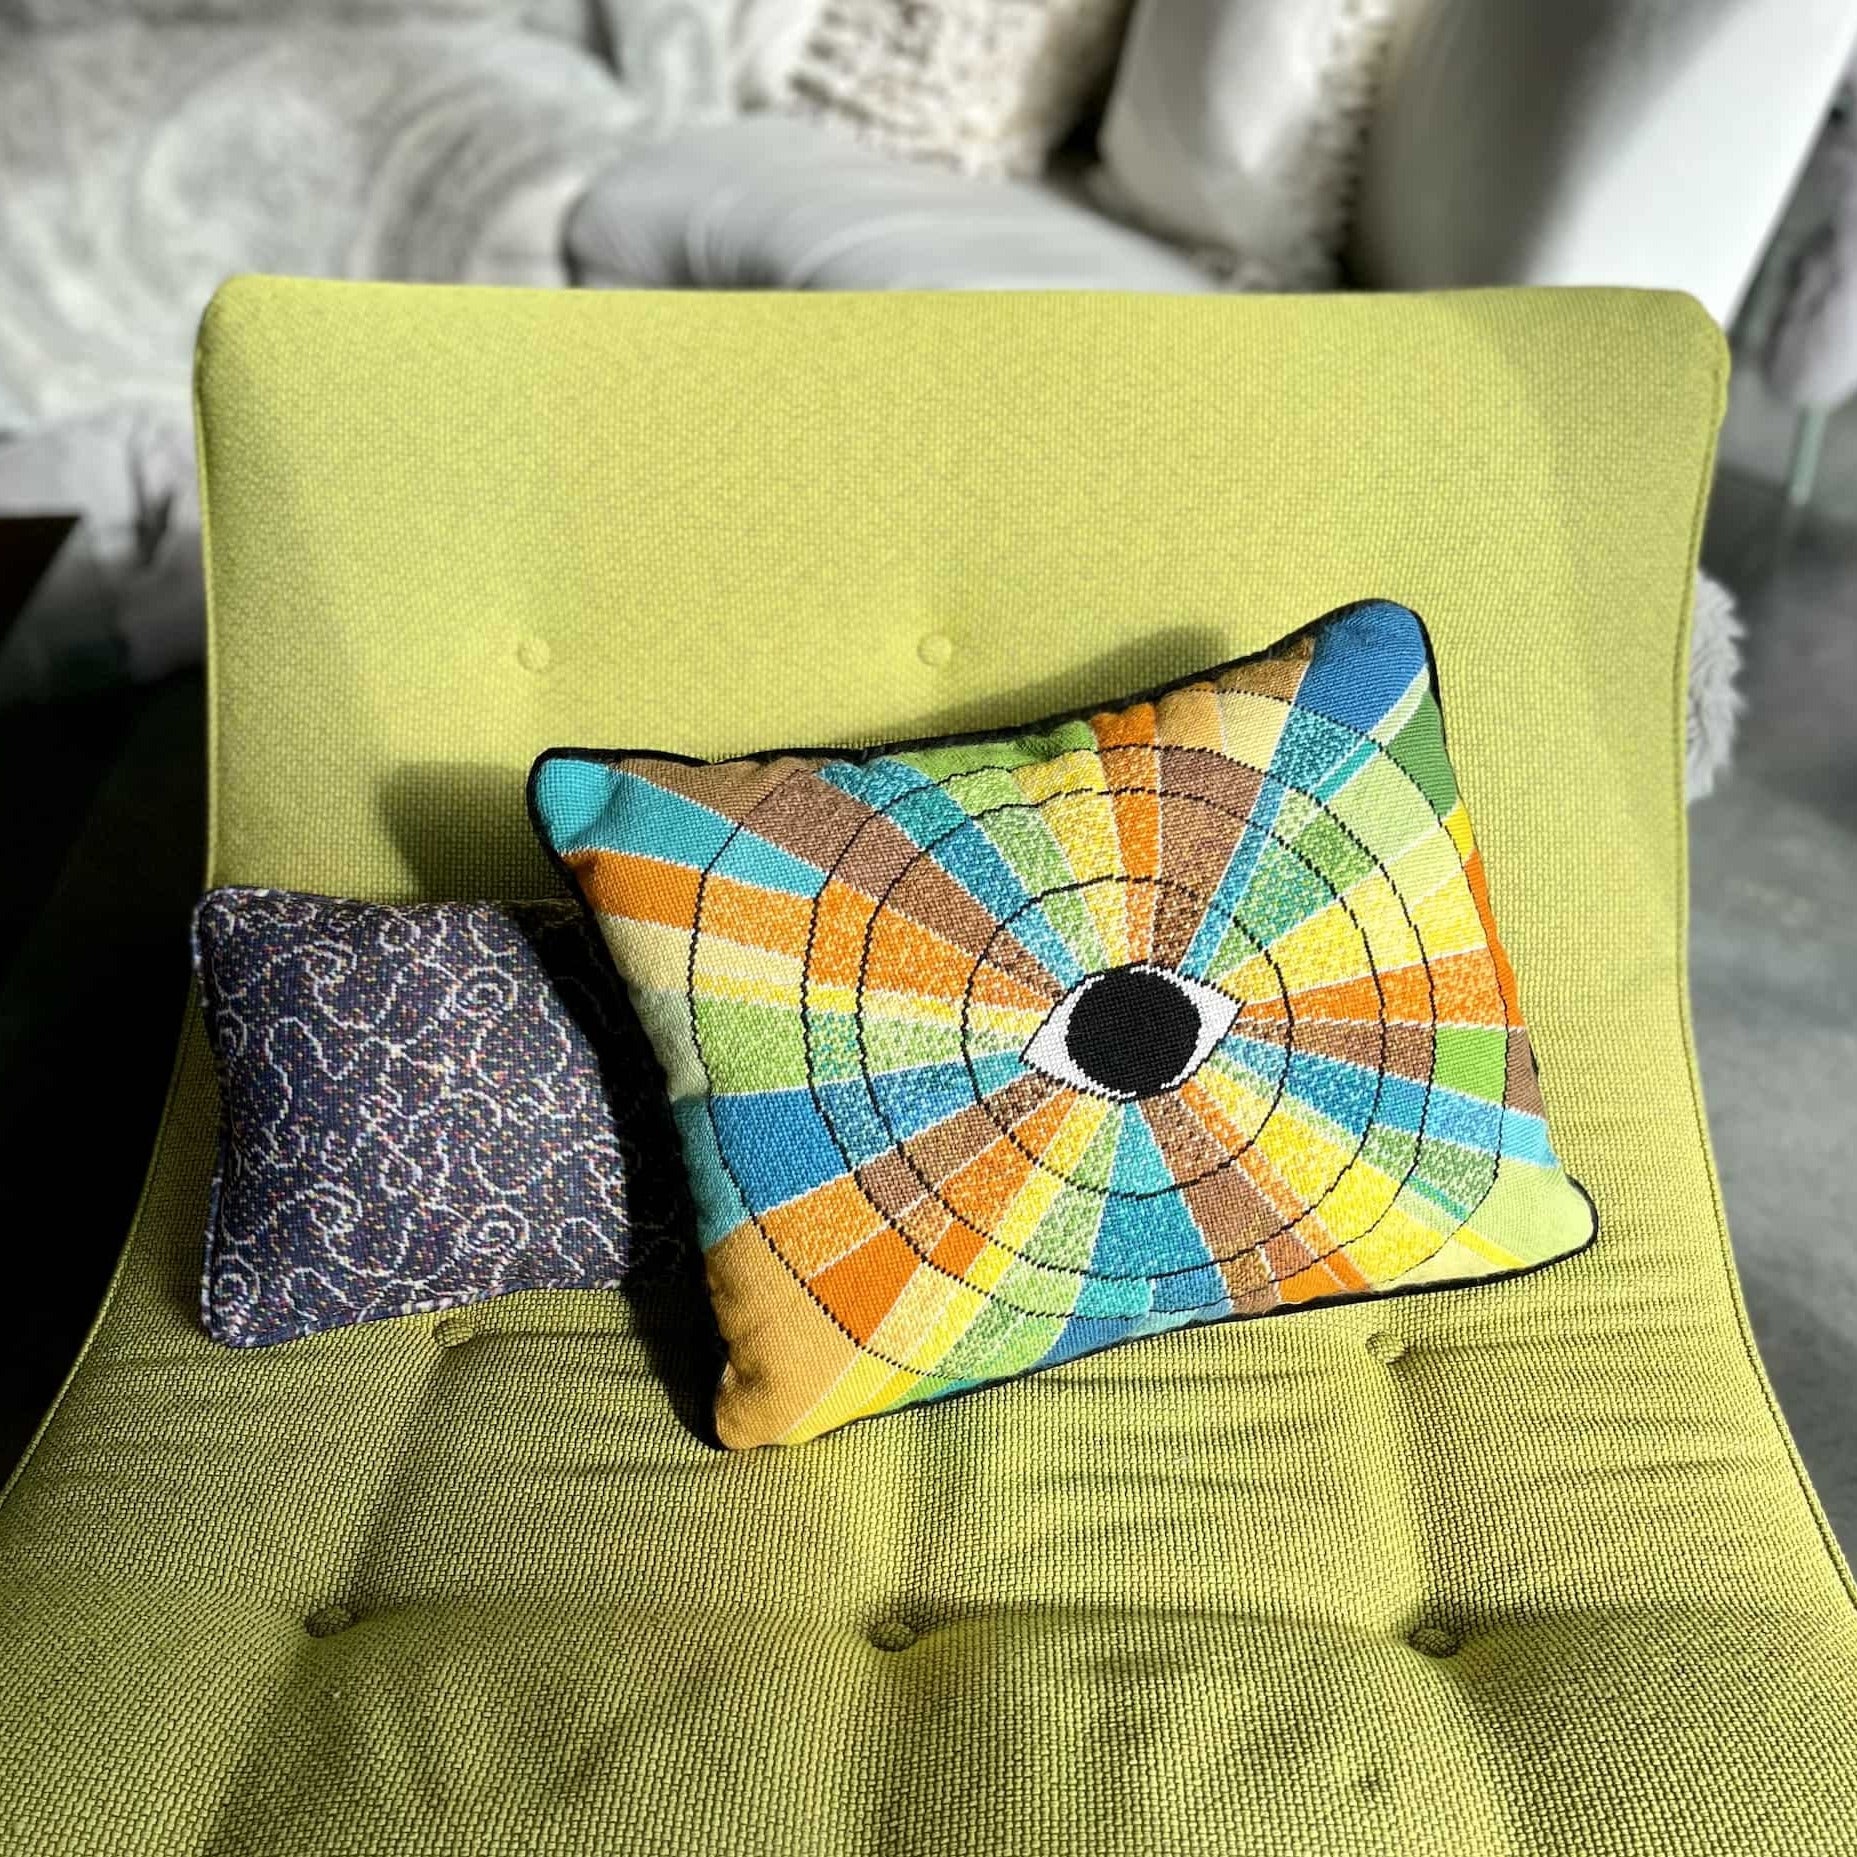 pillow has eye centered design with variegated rays of color - turquoise, green, brown, orange, yellow